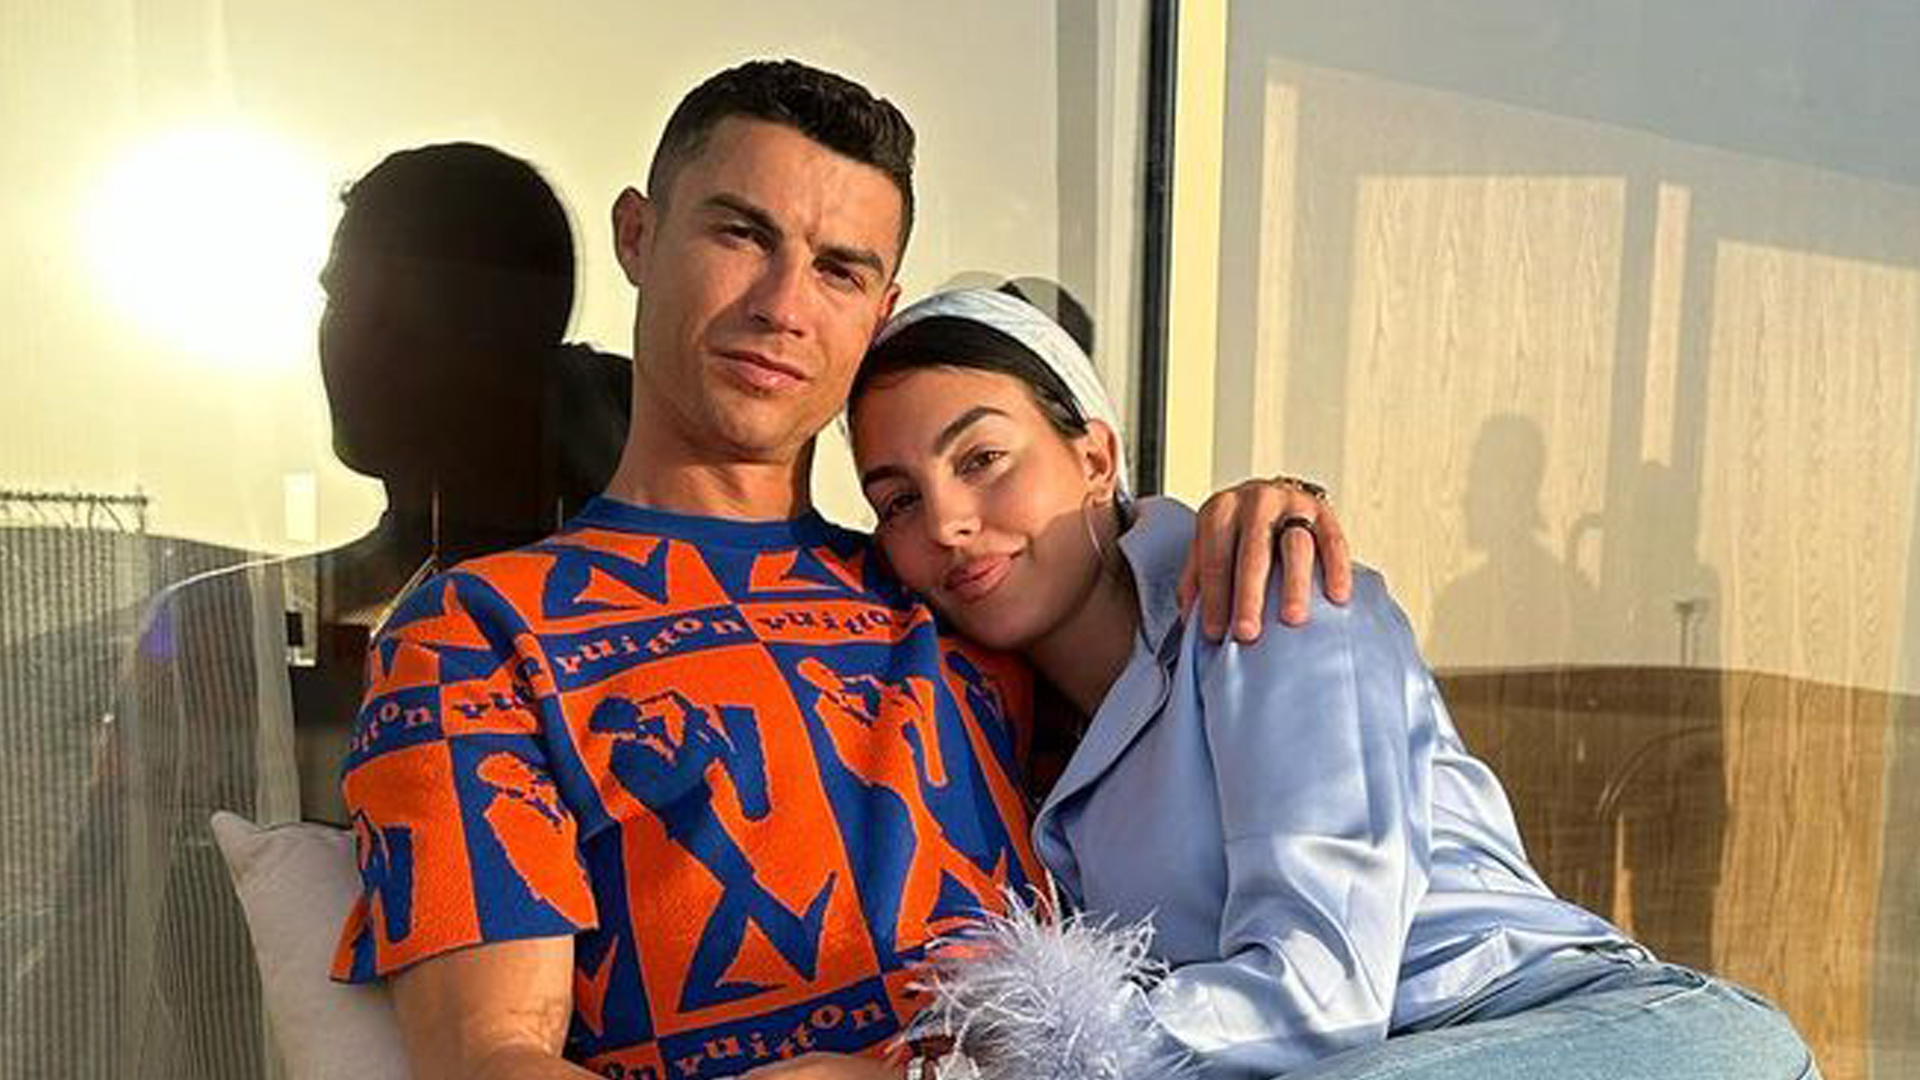 Cristiano Ronaldo cuddles Georgina Rodriguez in loved-up snap after they celebrate Man Utd legend's birthday | The US Sun